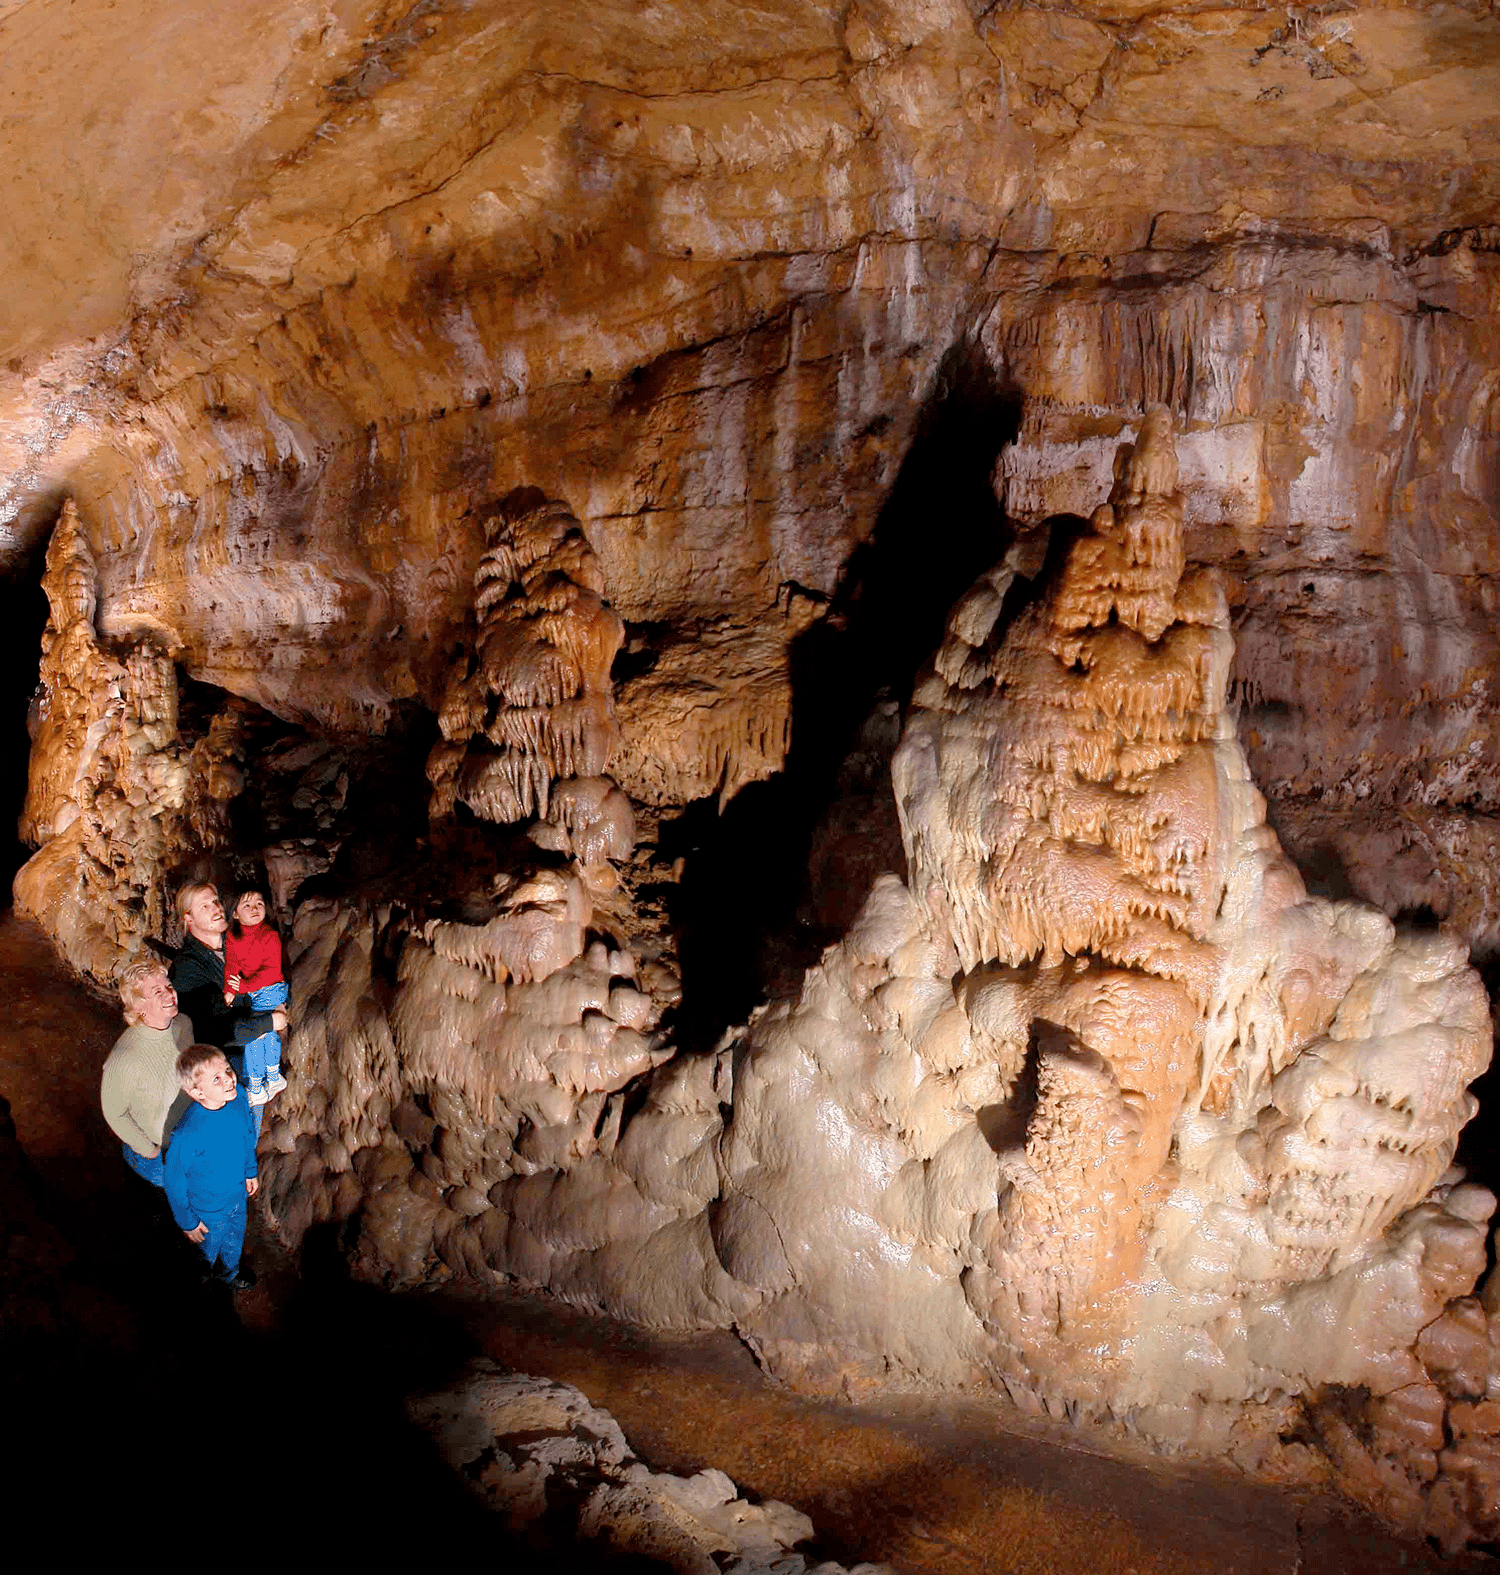 South Cavern of Cave of the Mounds